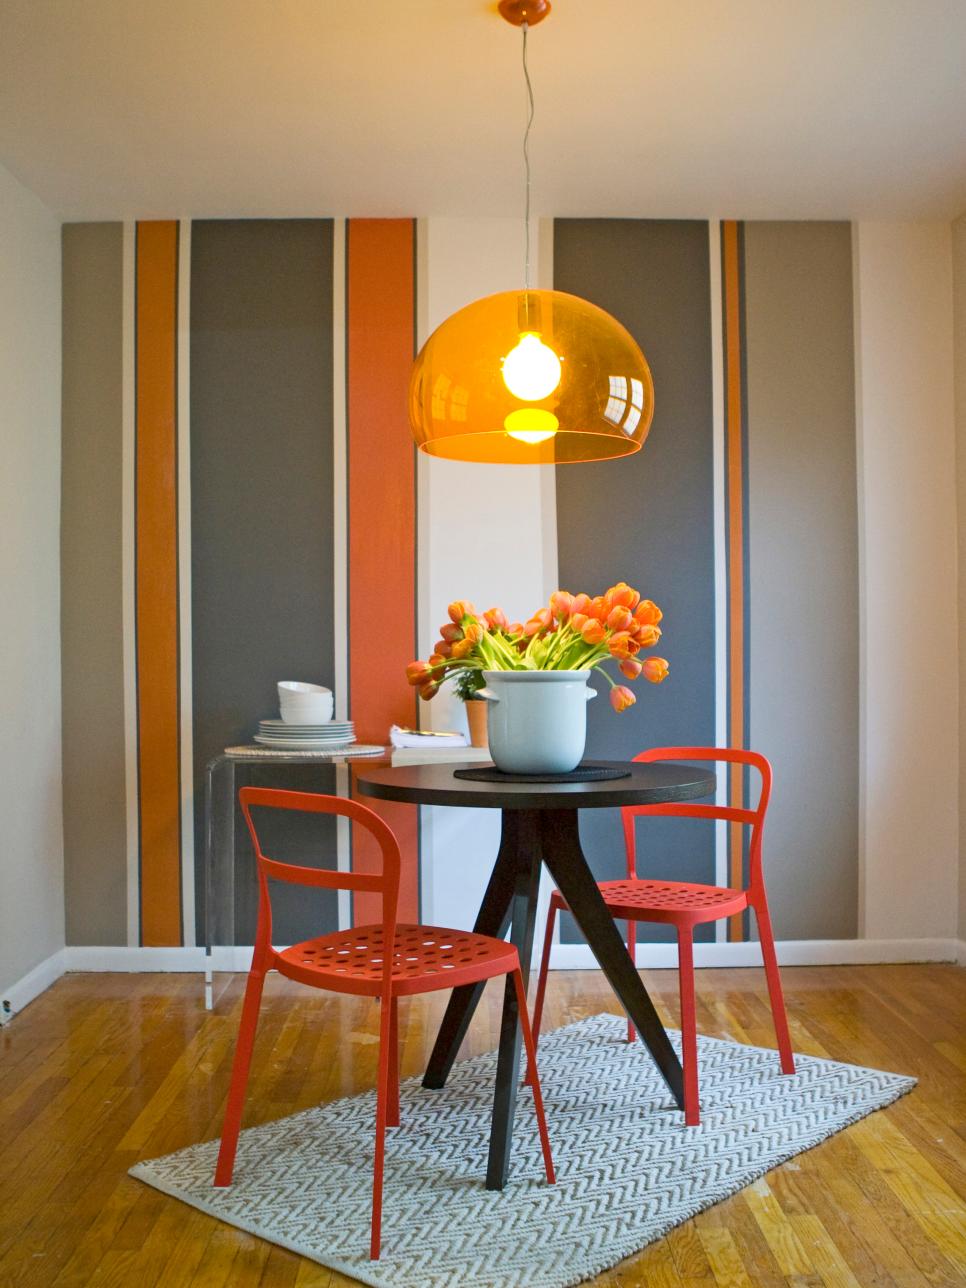 Dining Room With Striped Accent Wall & Shades of Orange